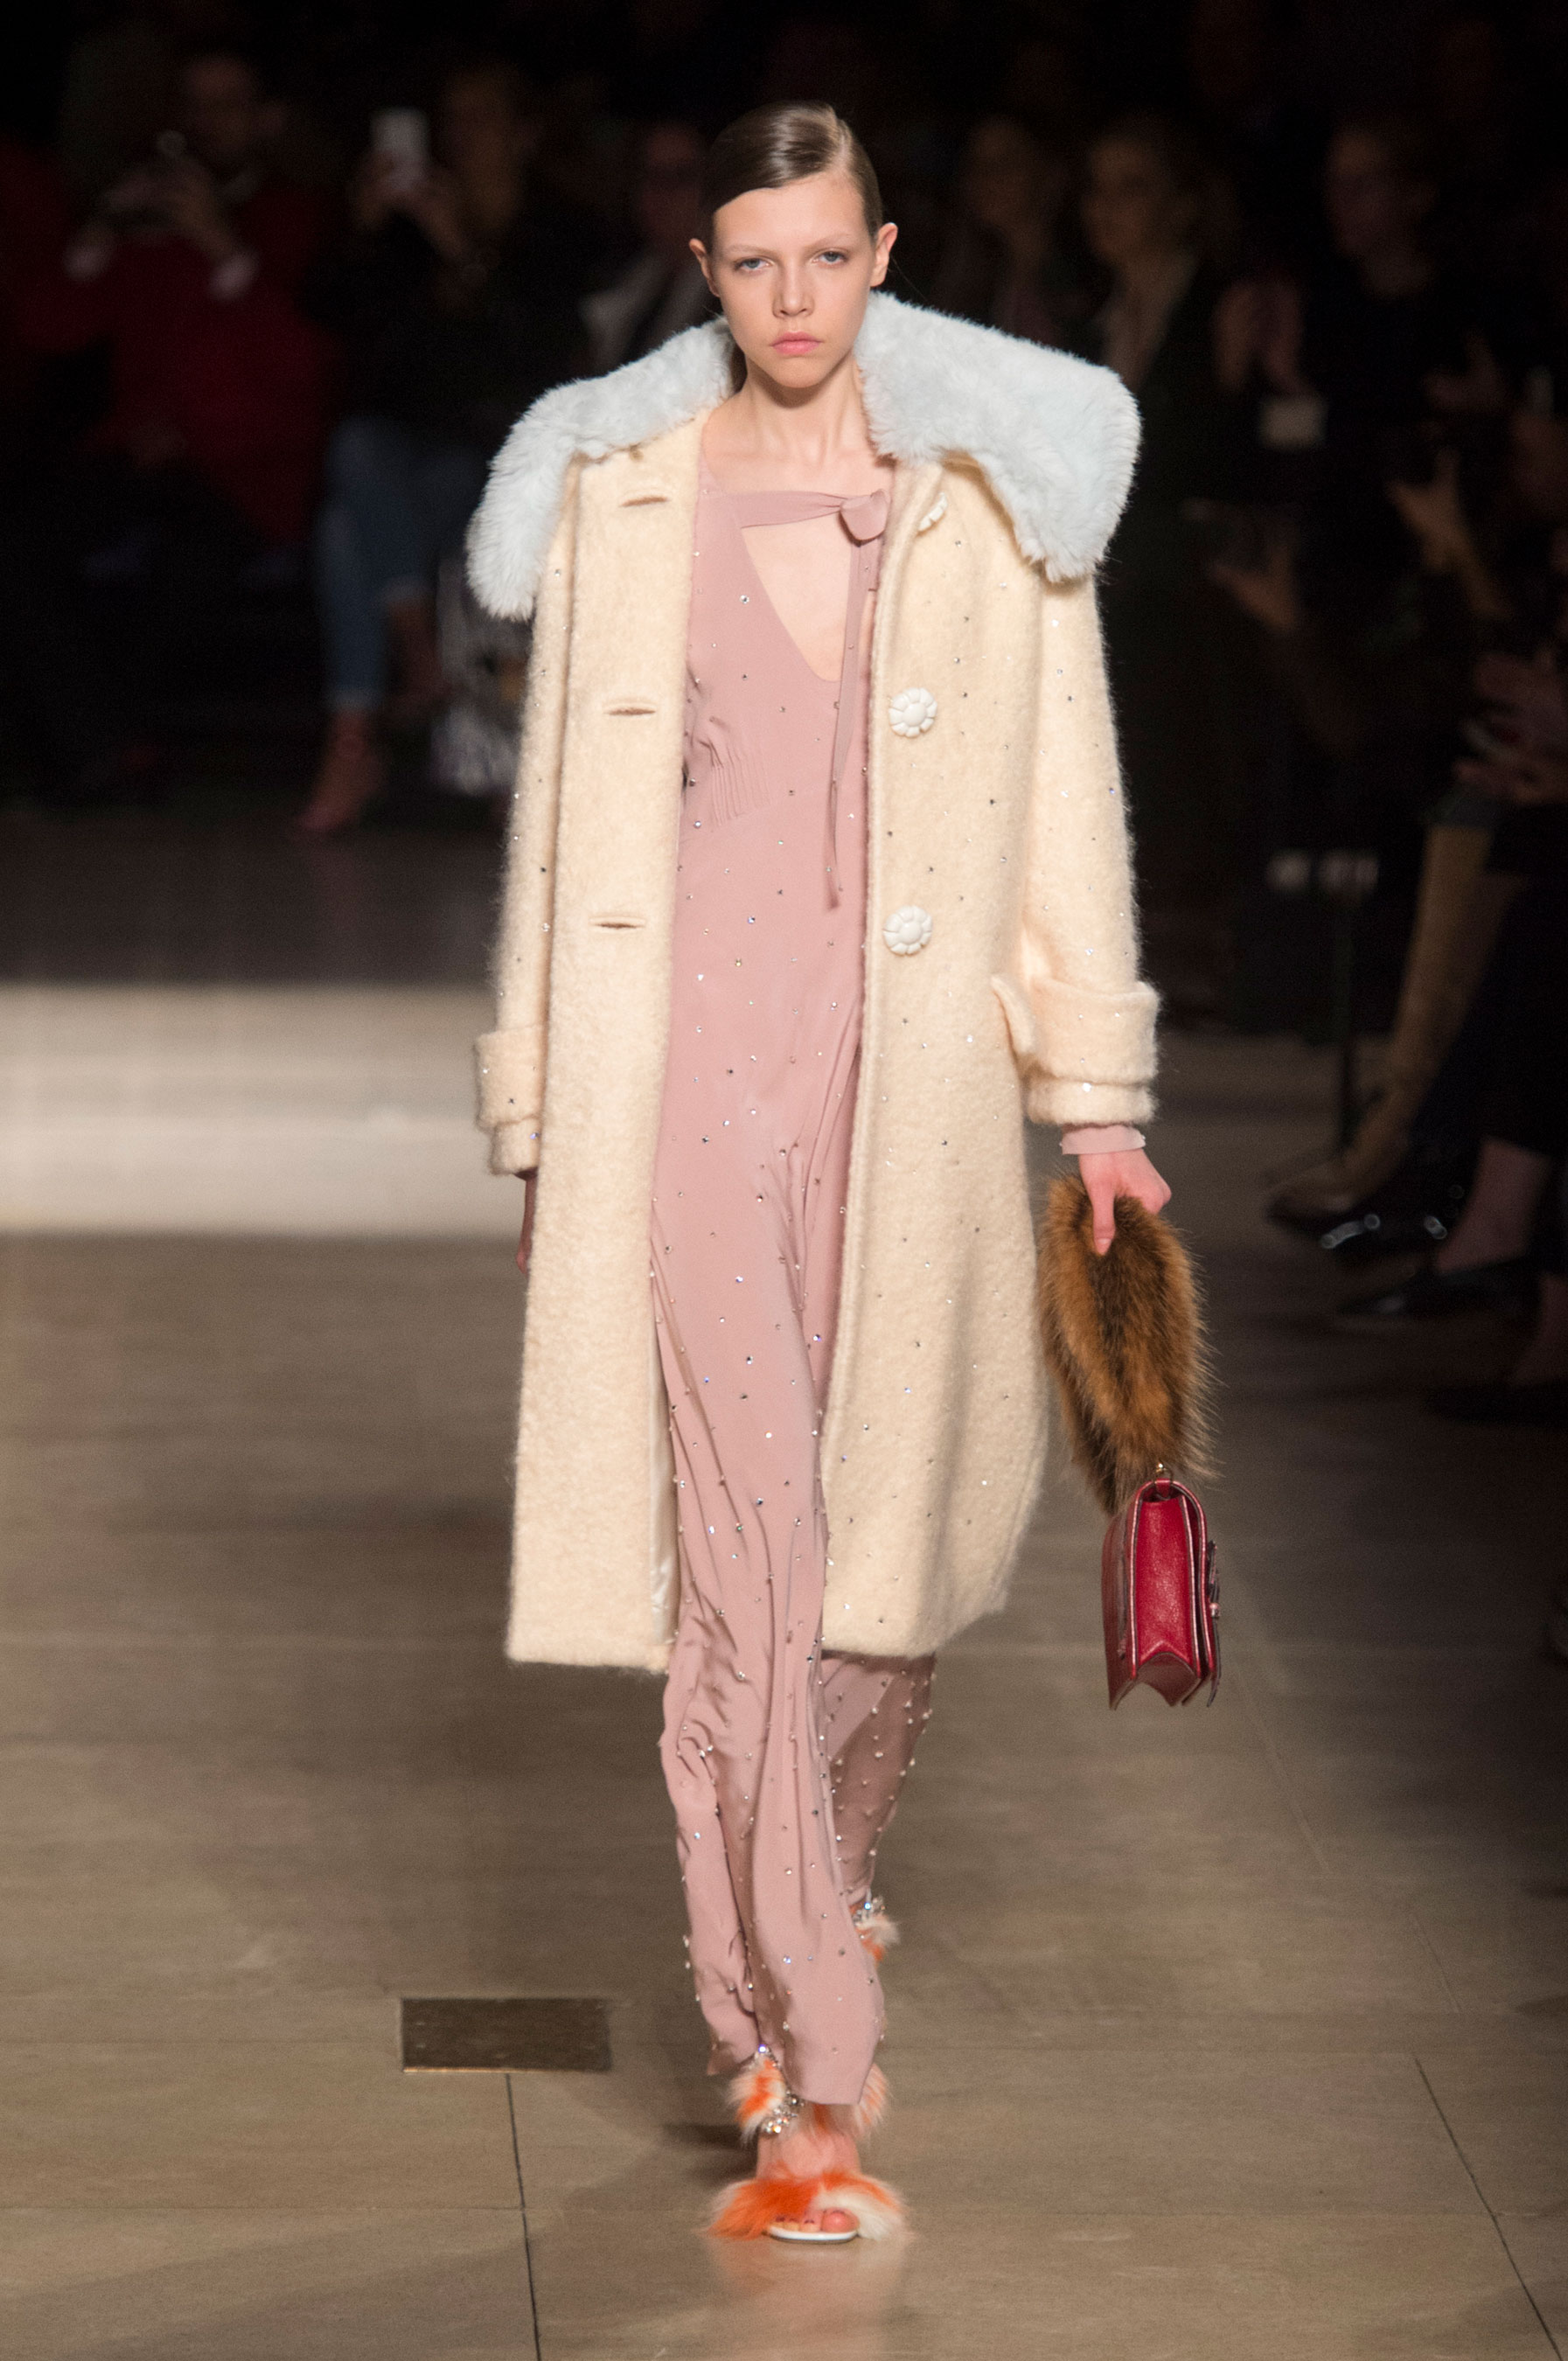 Key Fashion Trends Fall 2017, Playful Pastels - The Impression